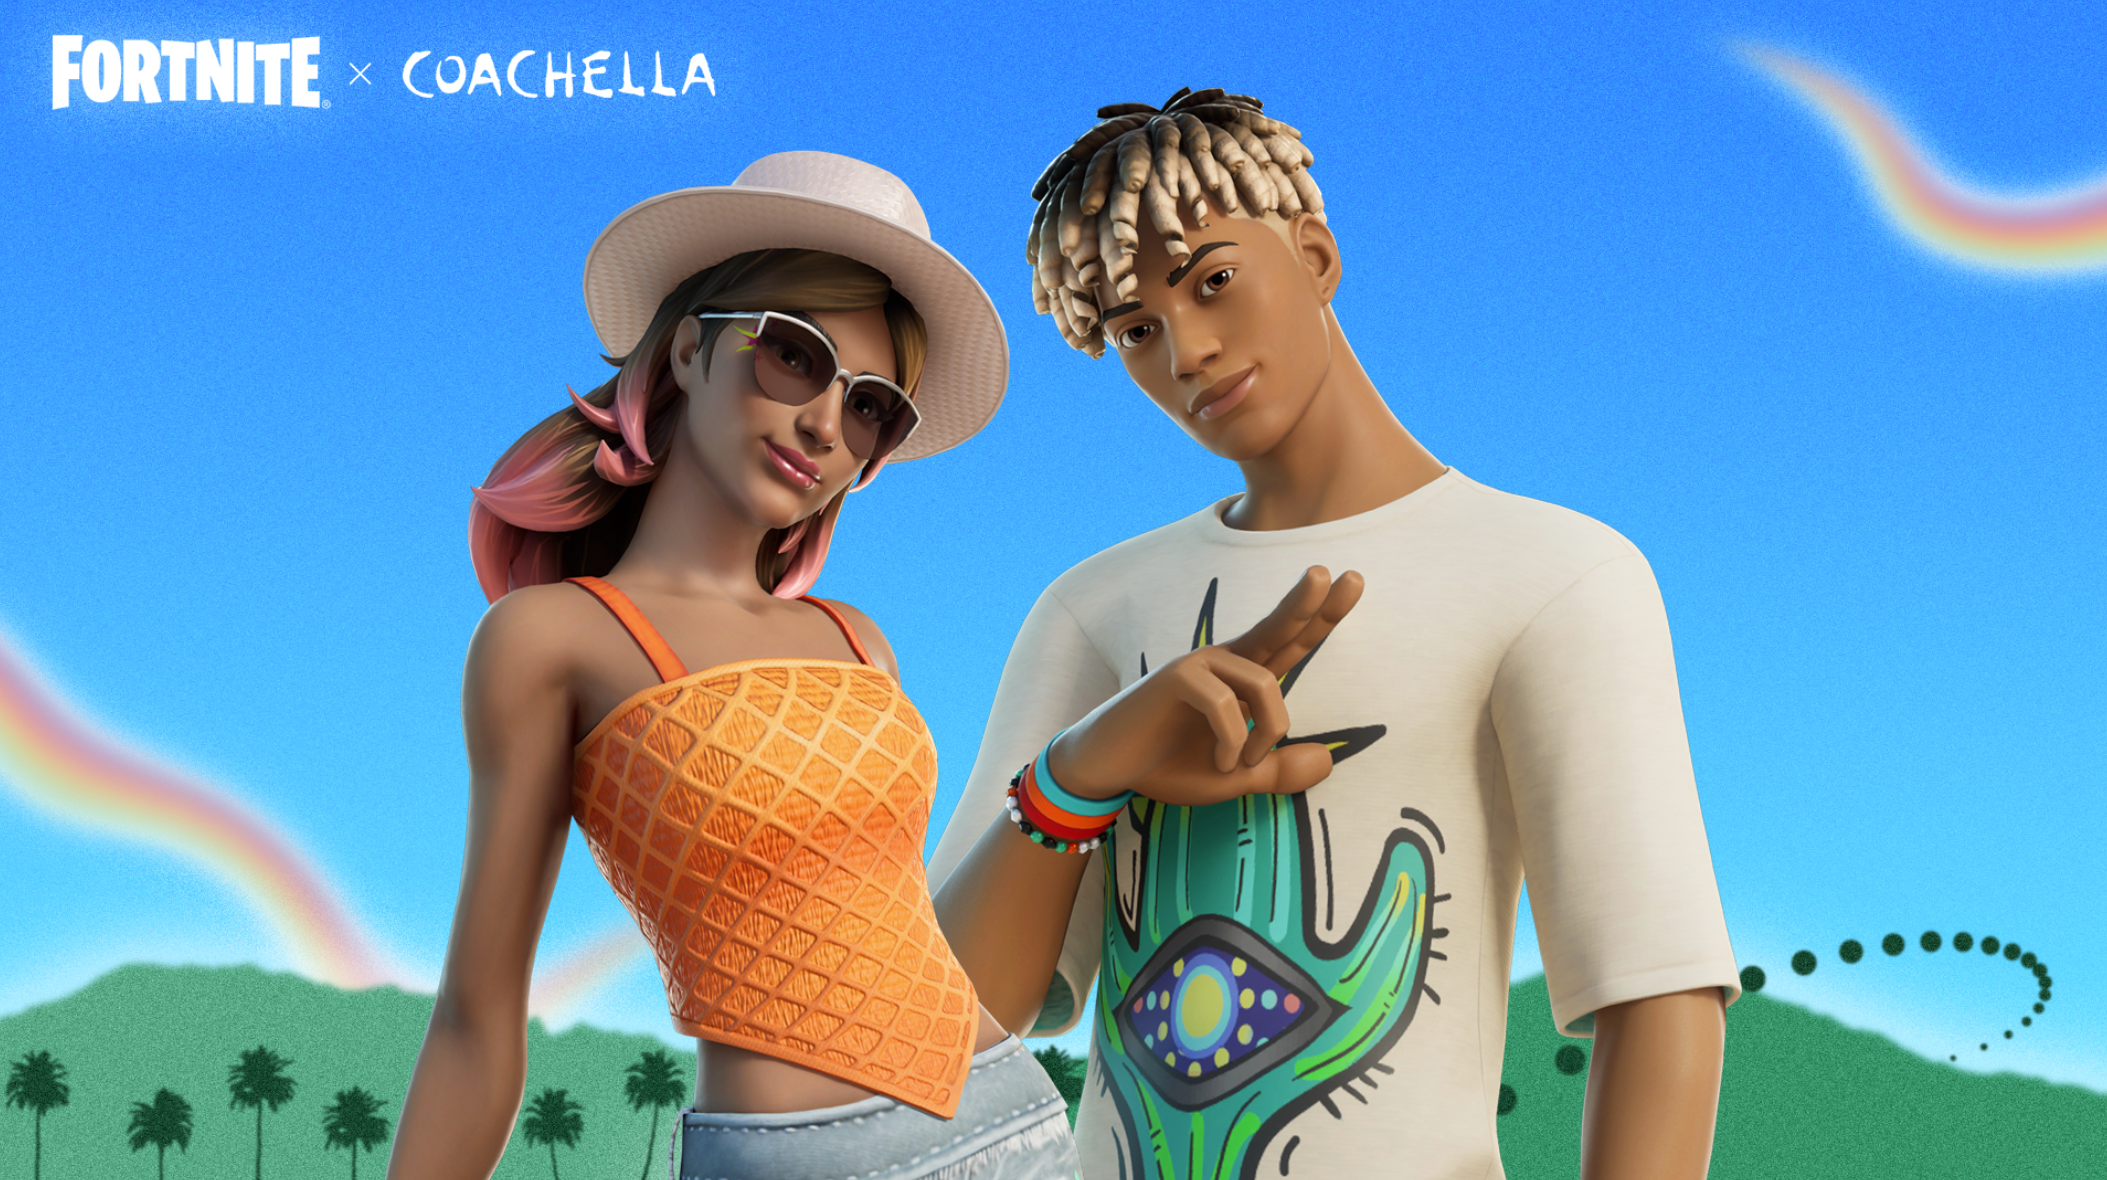 Fortnite Teaming With Coachella For Interactive Clothing/Music at Fest –  Billboard